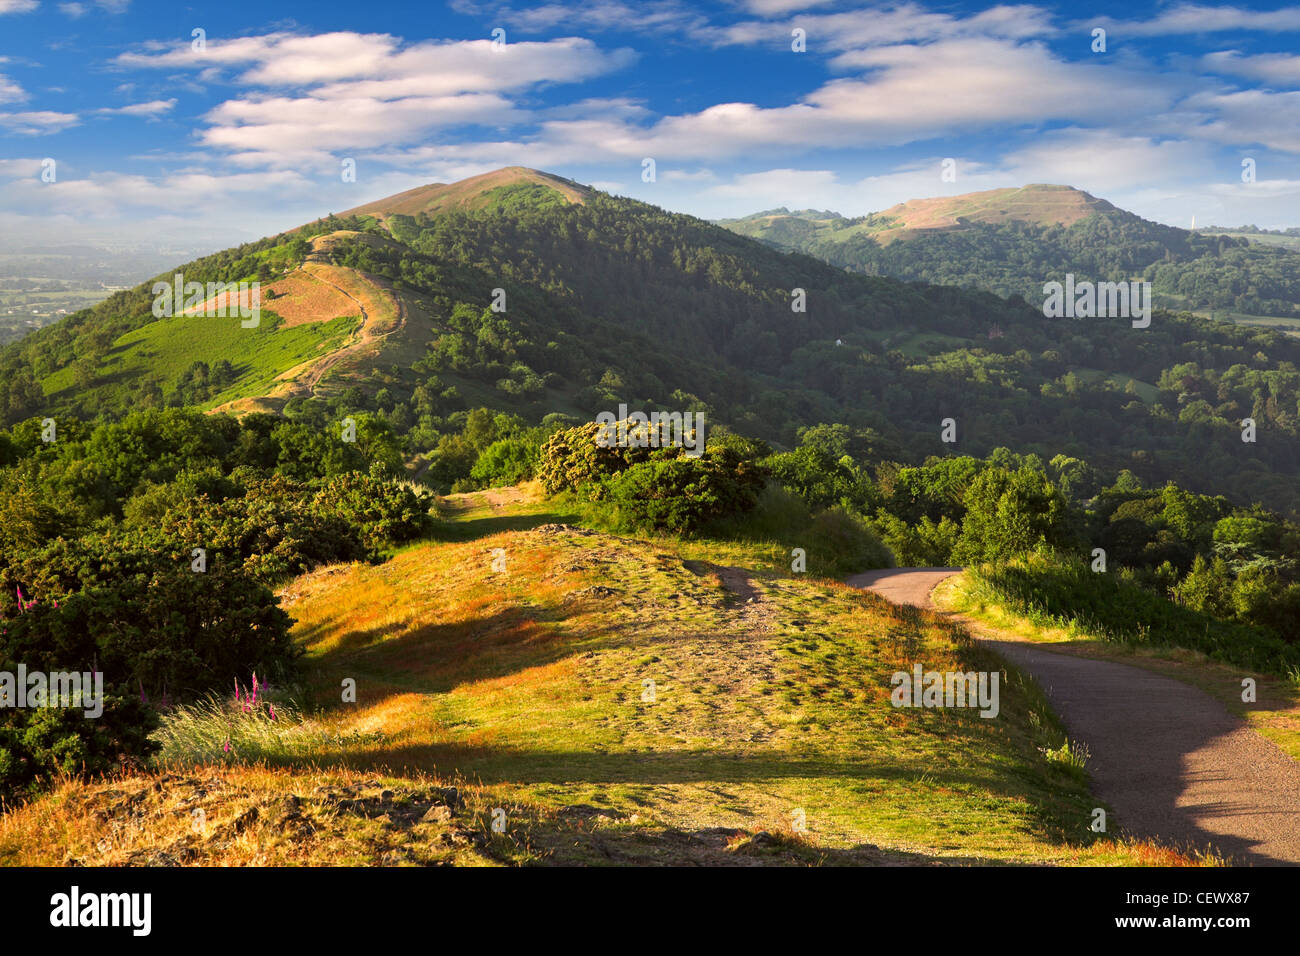 A view toward the Malvern Hills which stand astride the three counties of Herefordshire, Gloucestershire and Worcestershire. The Stock Photo